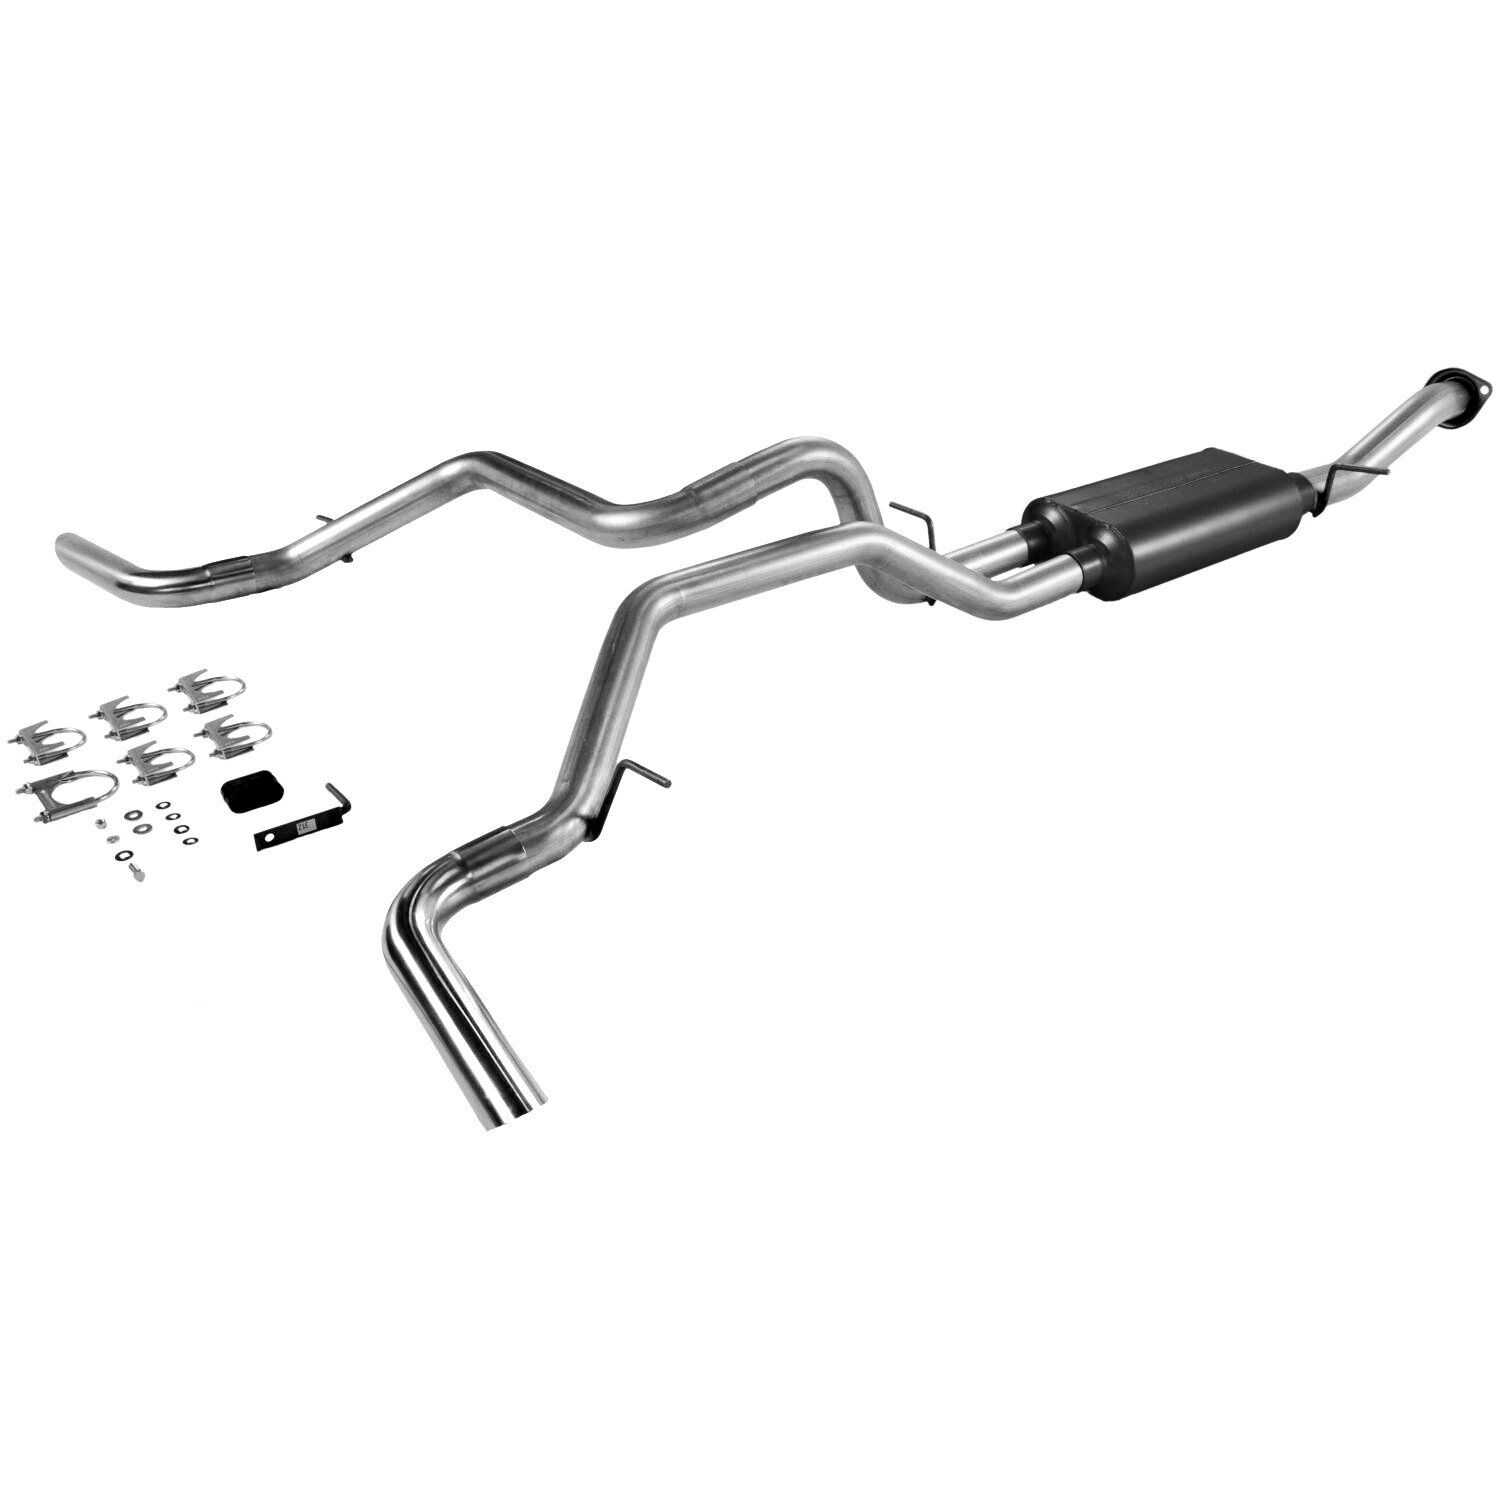 17368 Flowmaster American Thunder CatBack Exhaust System